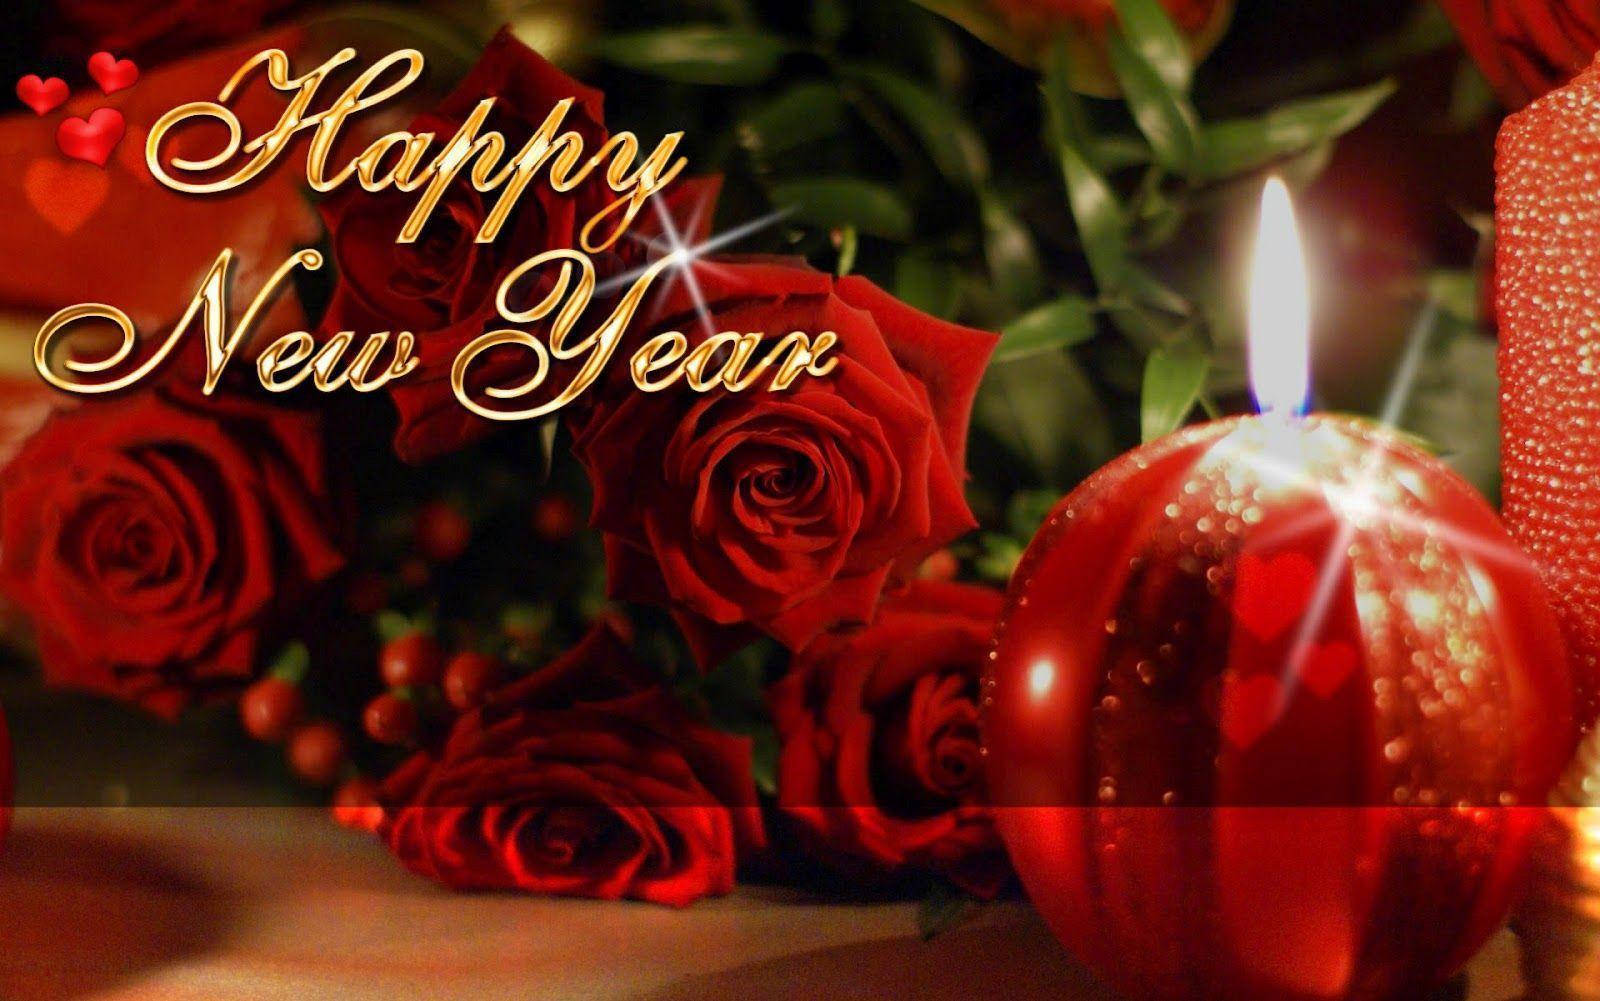 Happy New Year 2021 Greeting With Red Roses